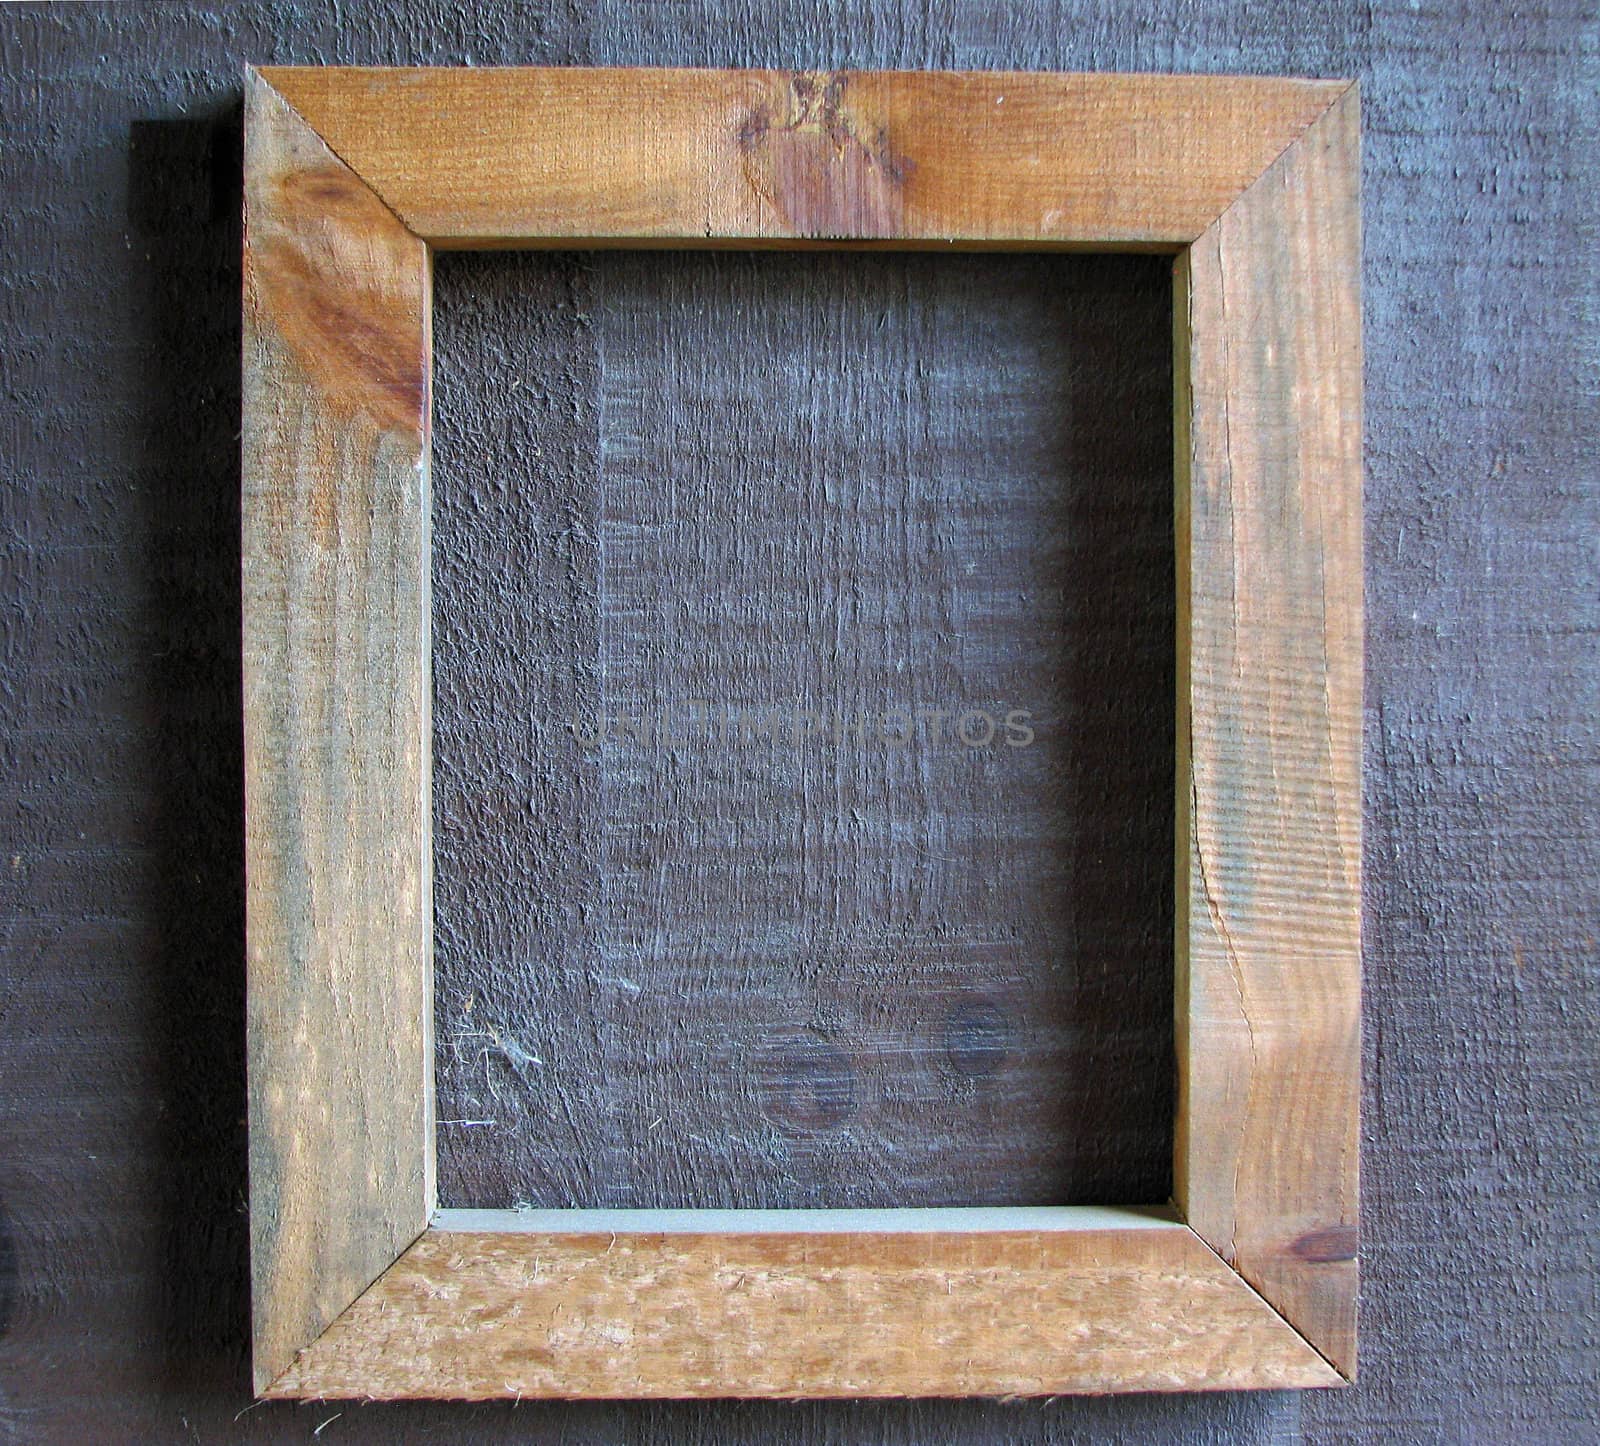 An empty wooden frame on a wooden wall.
